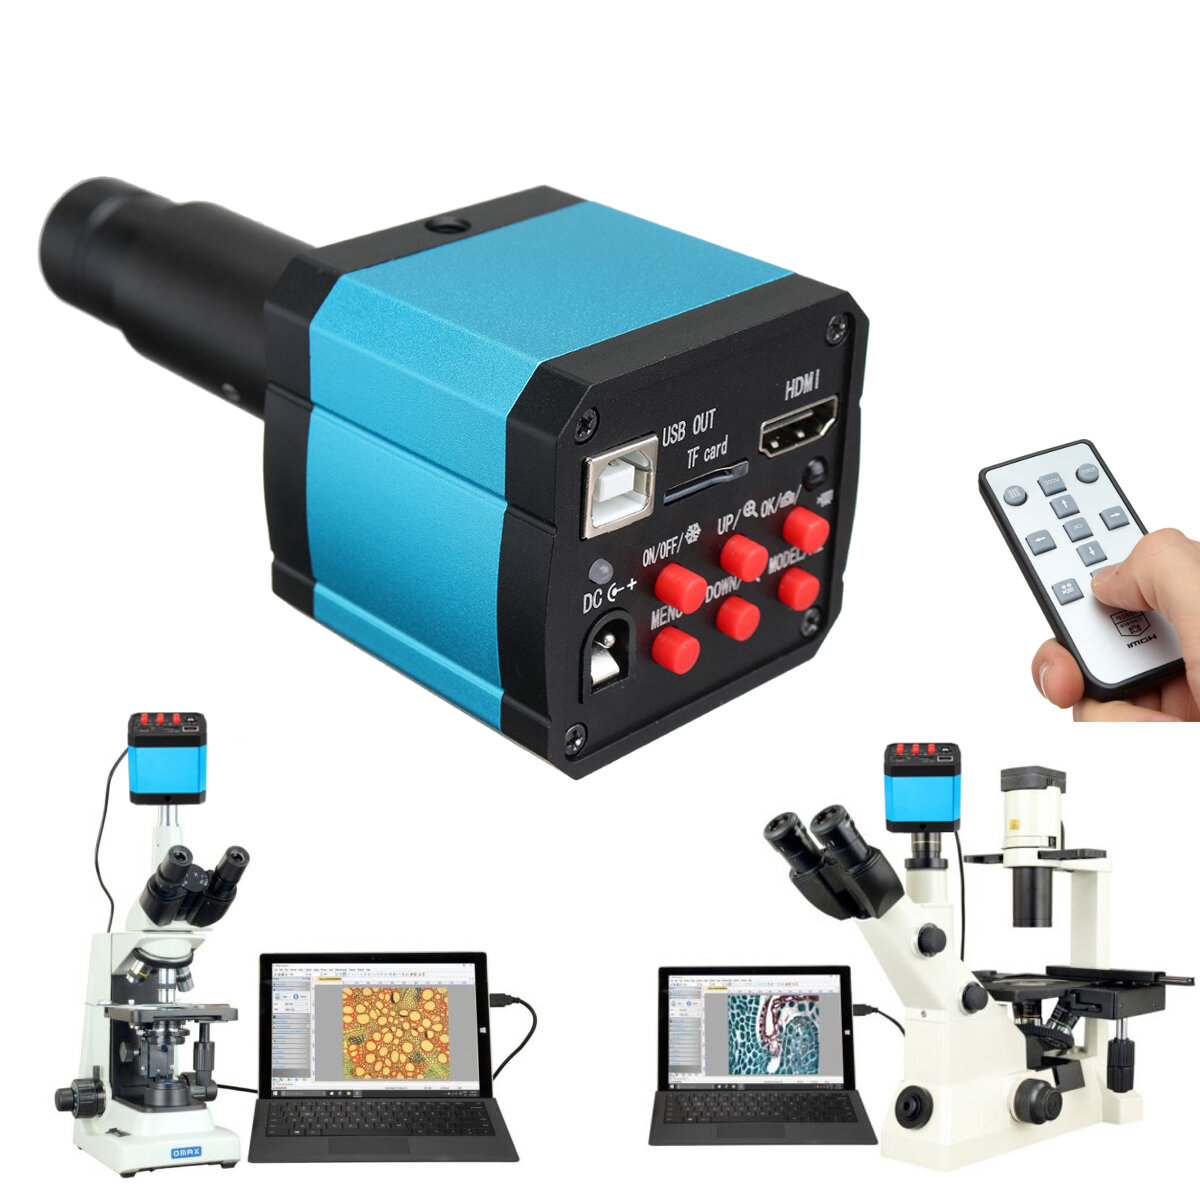 best price,hayear,16mp,1080p,60fps,usb,industry,microscope,camera,discount